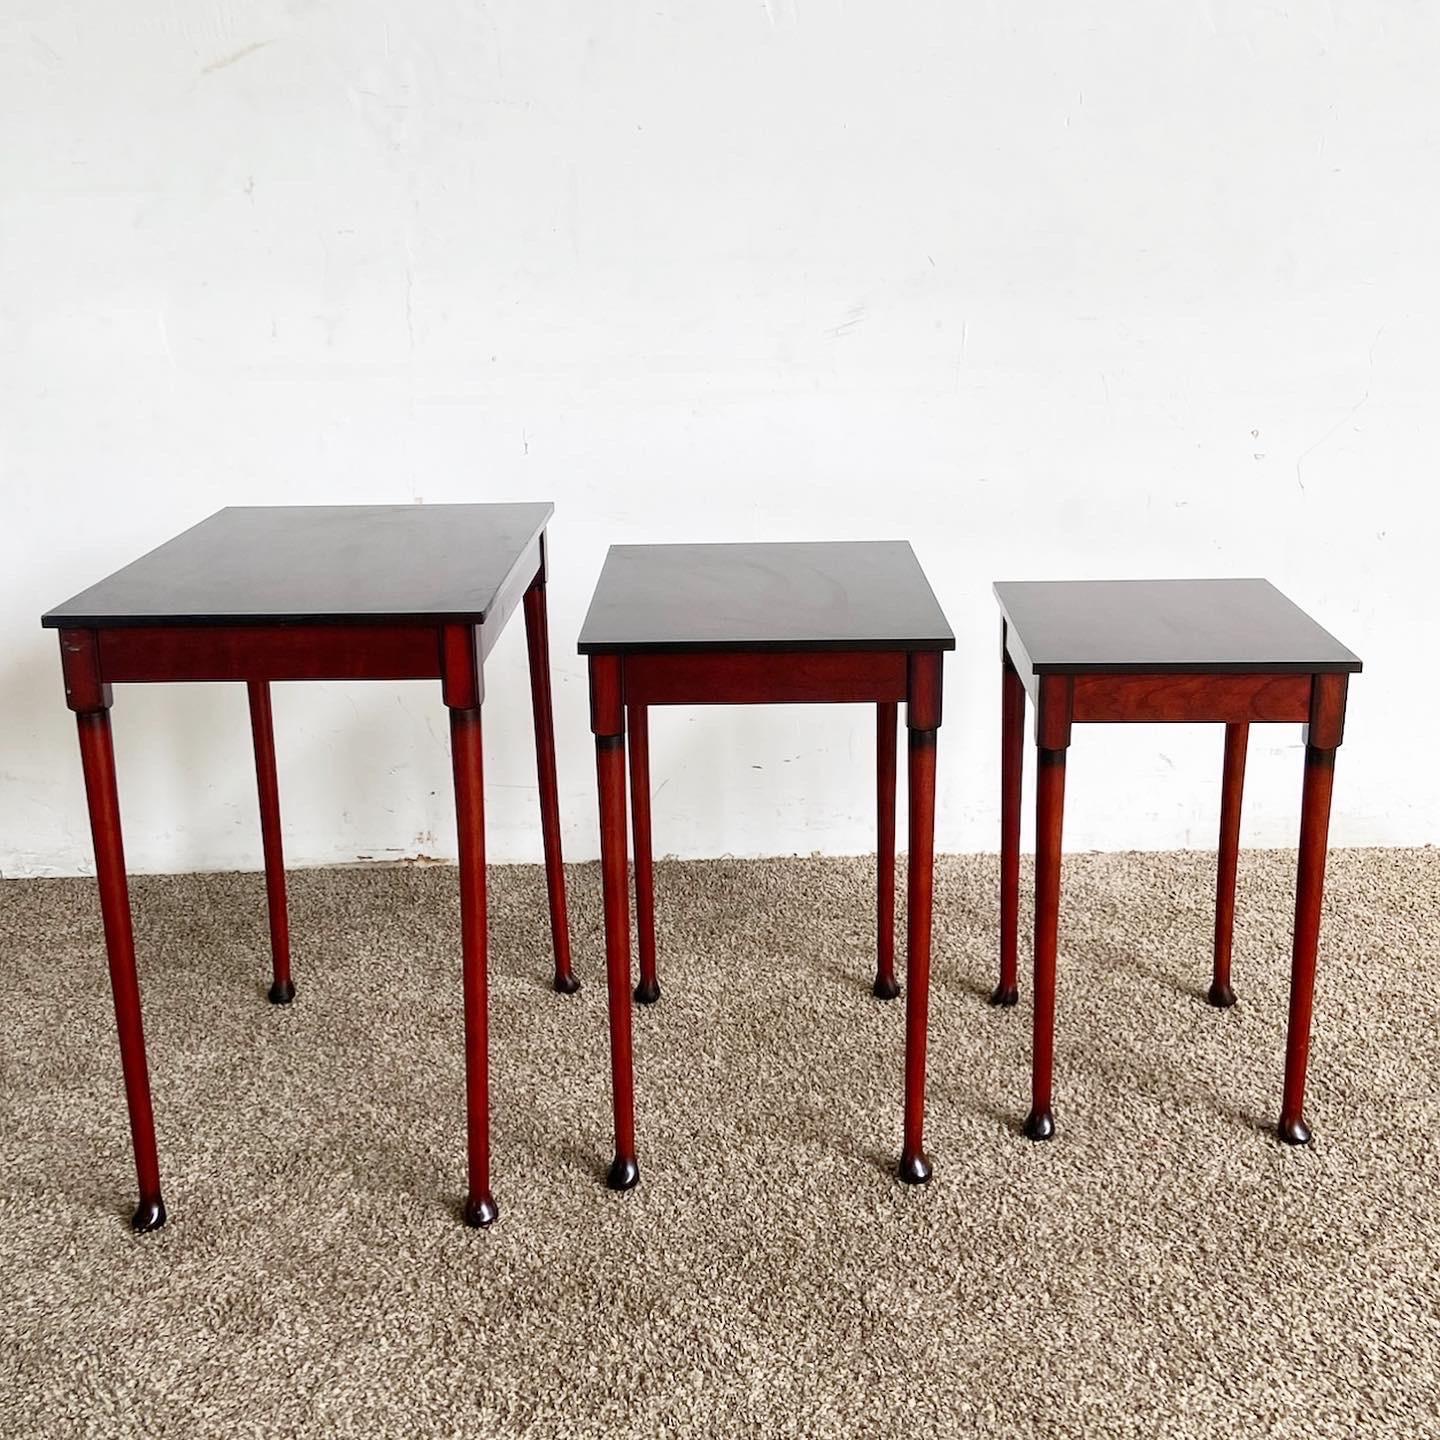 Chinese Traditional Mahogany Nesting Tables From Bombay Company - Set of 3 For Sale